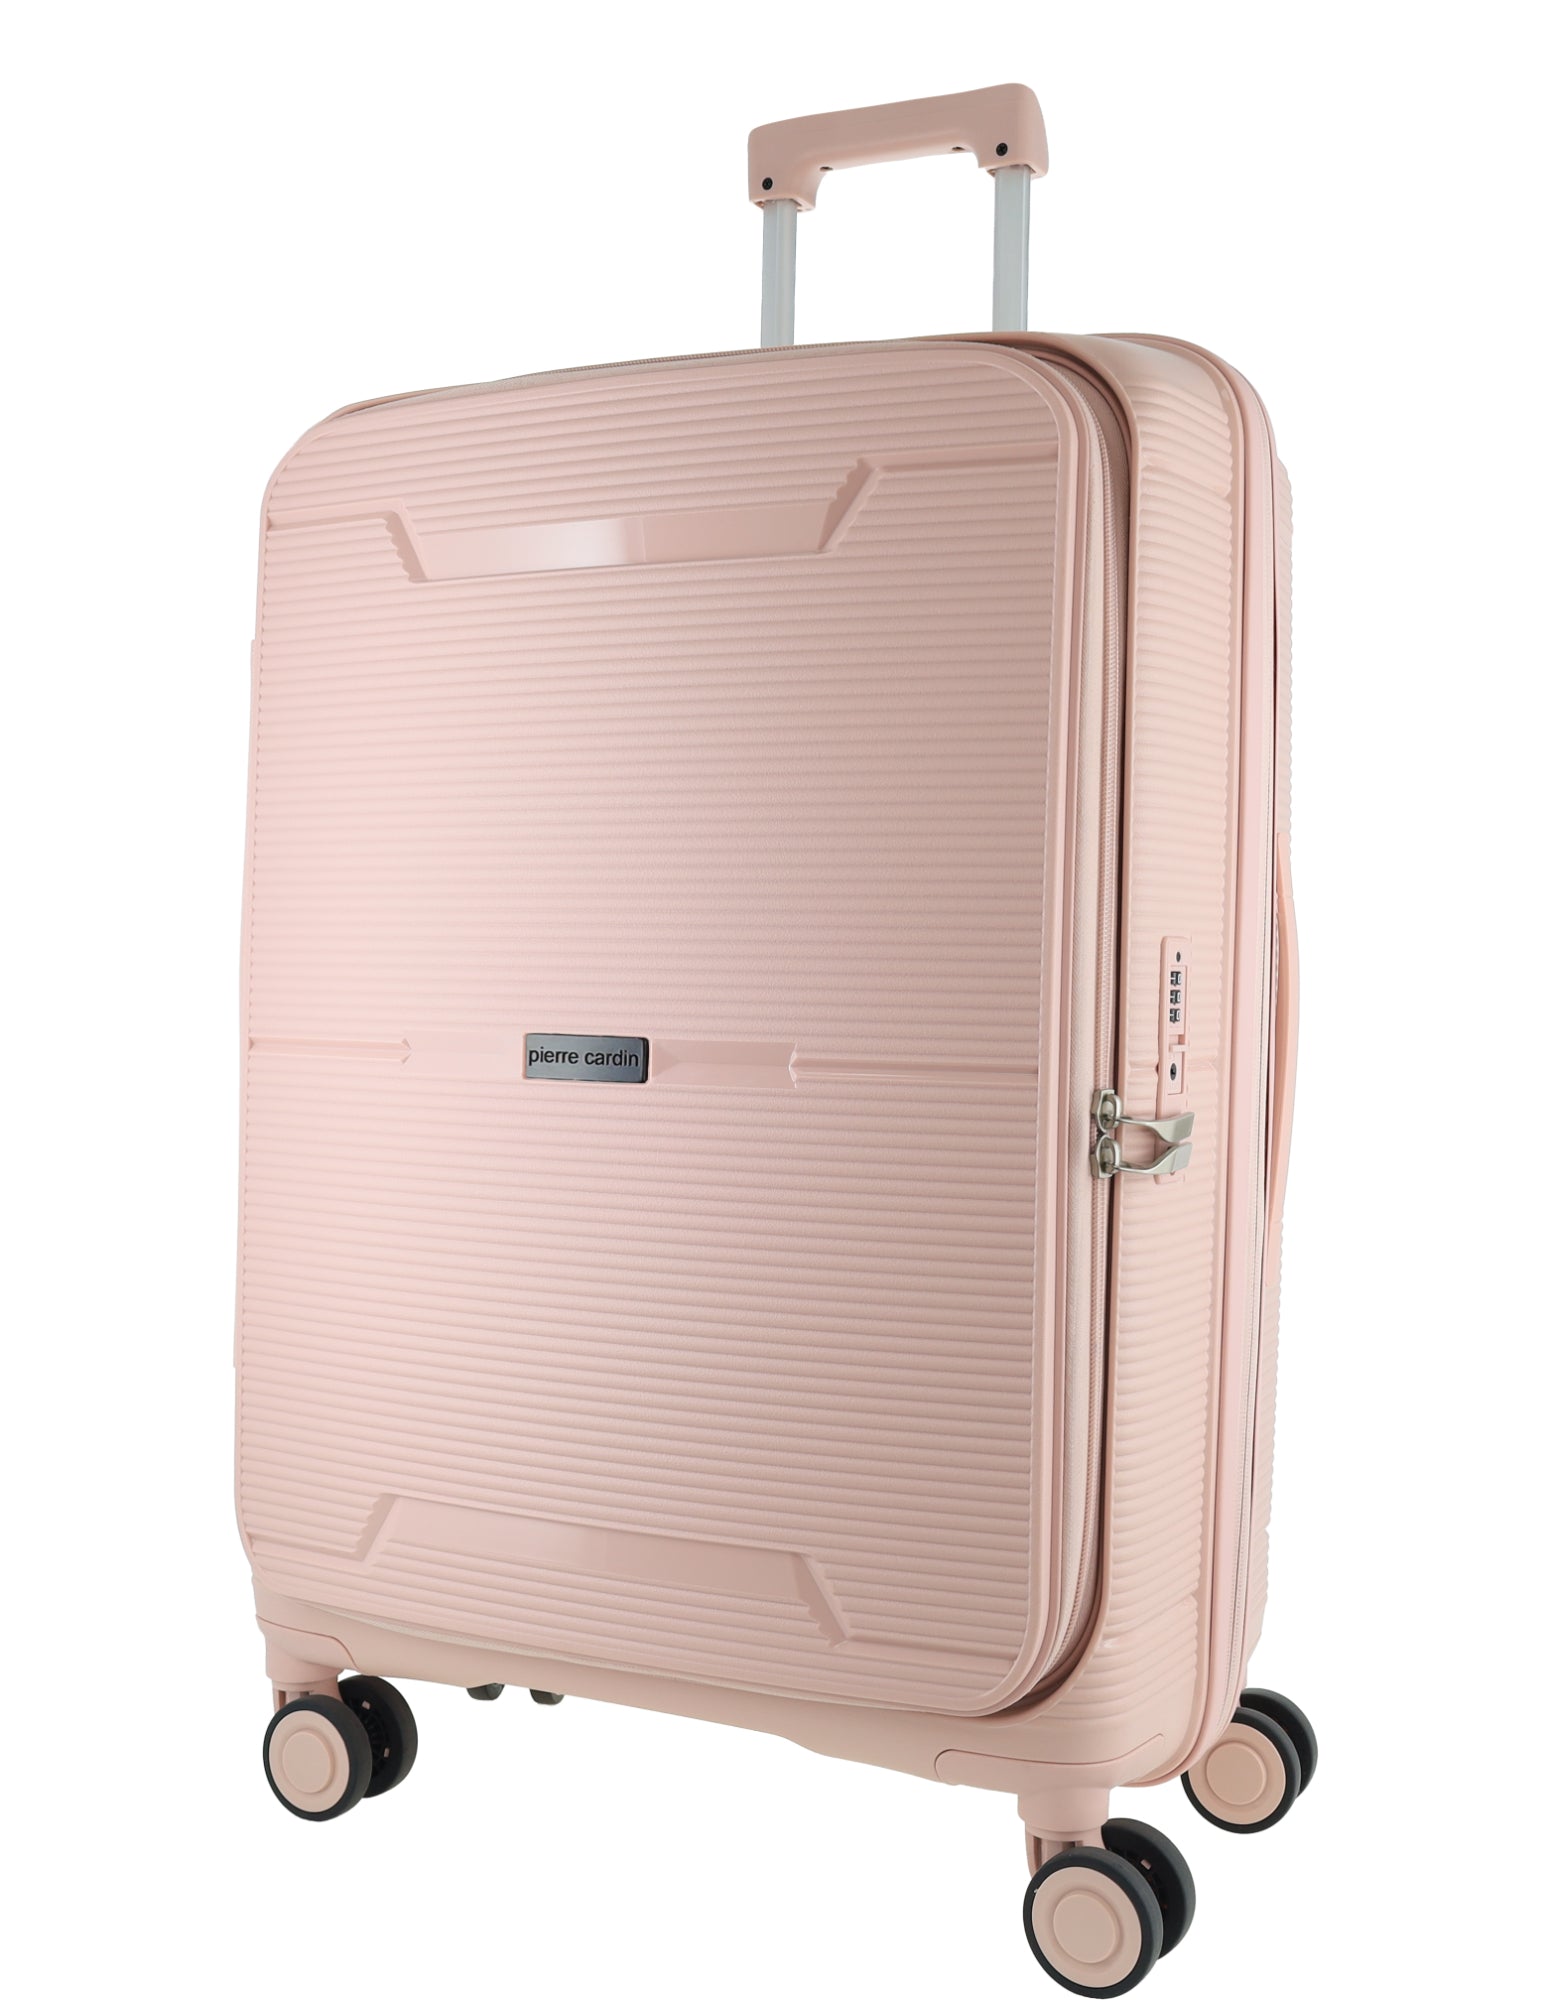 Pierre Cardin 80cm LARGE Hard Shell Suitcase in Blush